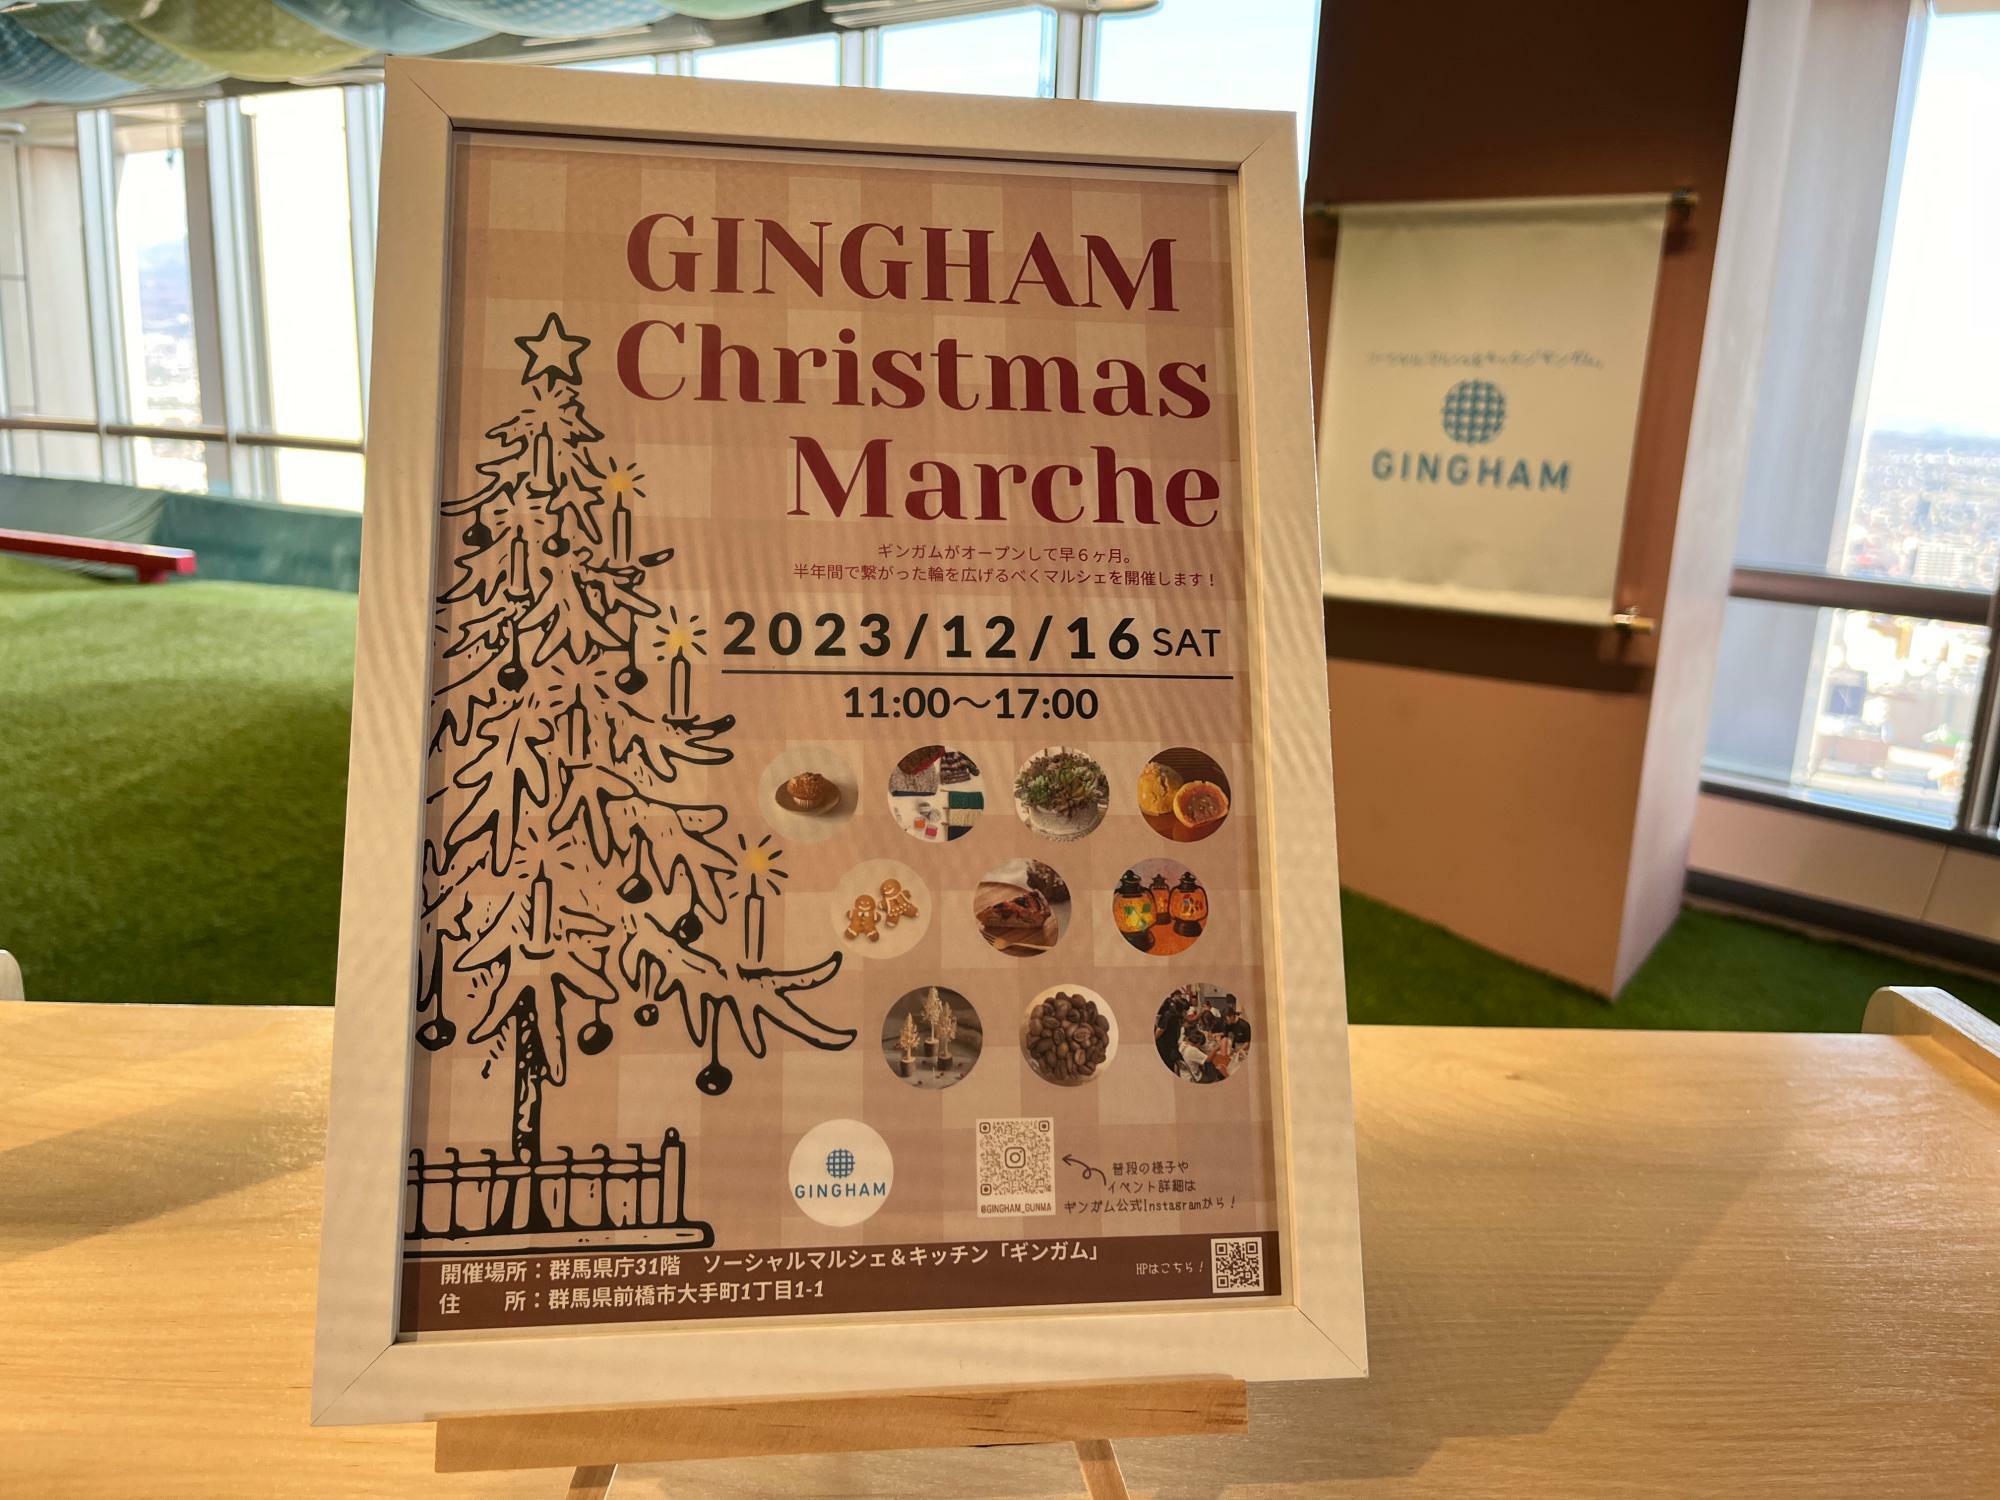 「GINGHAM Christmas Marche」開催告知の看板